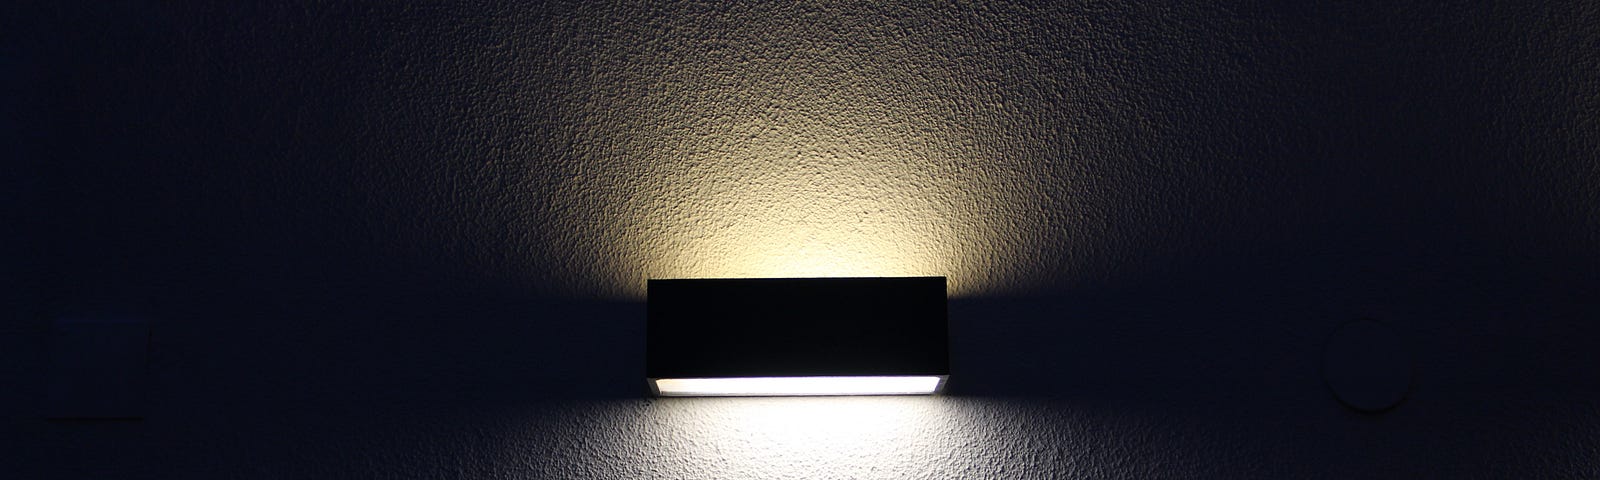 A solitary rectangular light casts a bright glow and a shadow across a wall